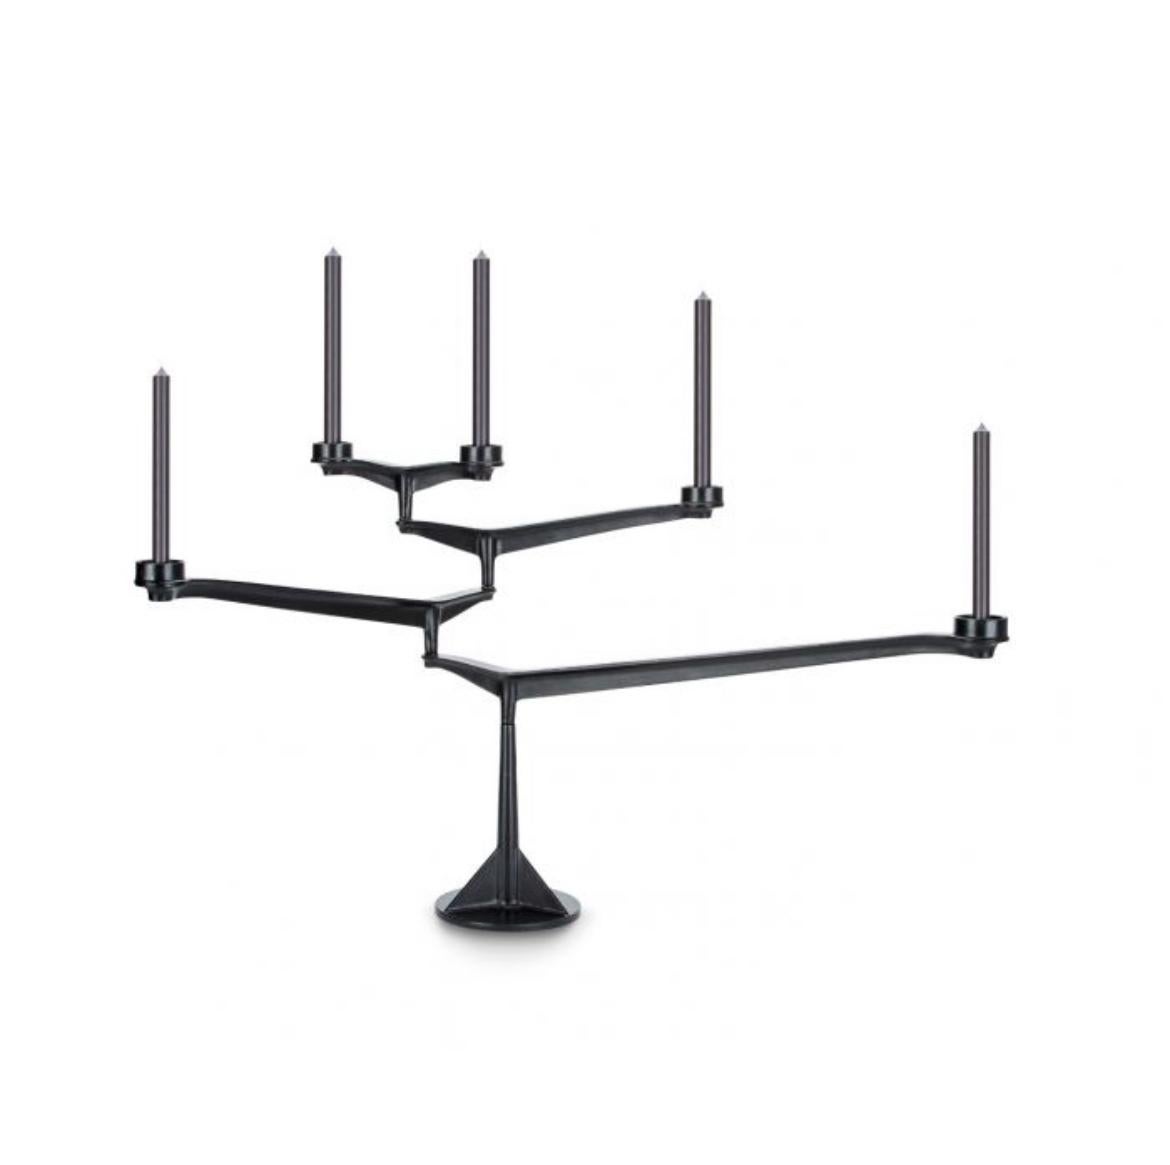 English Spin Large Iron Candelabra by Tom Dixon